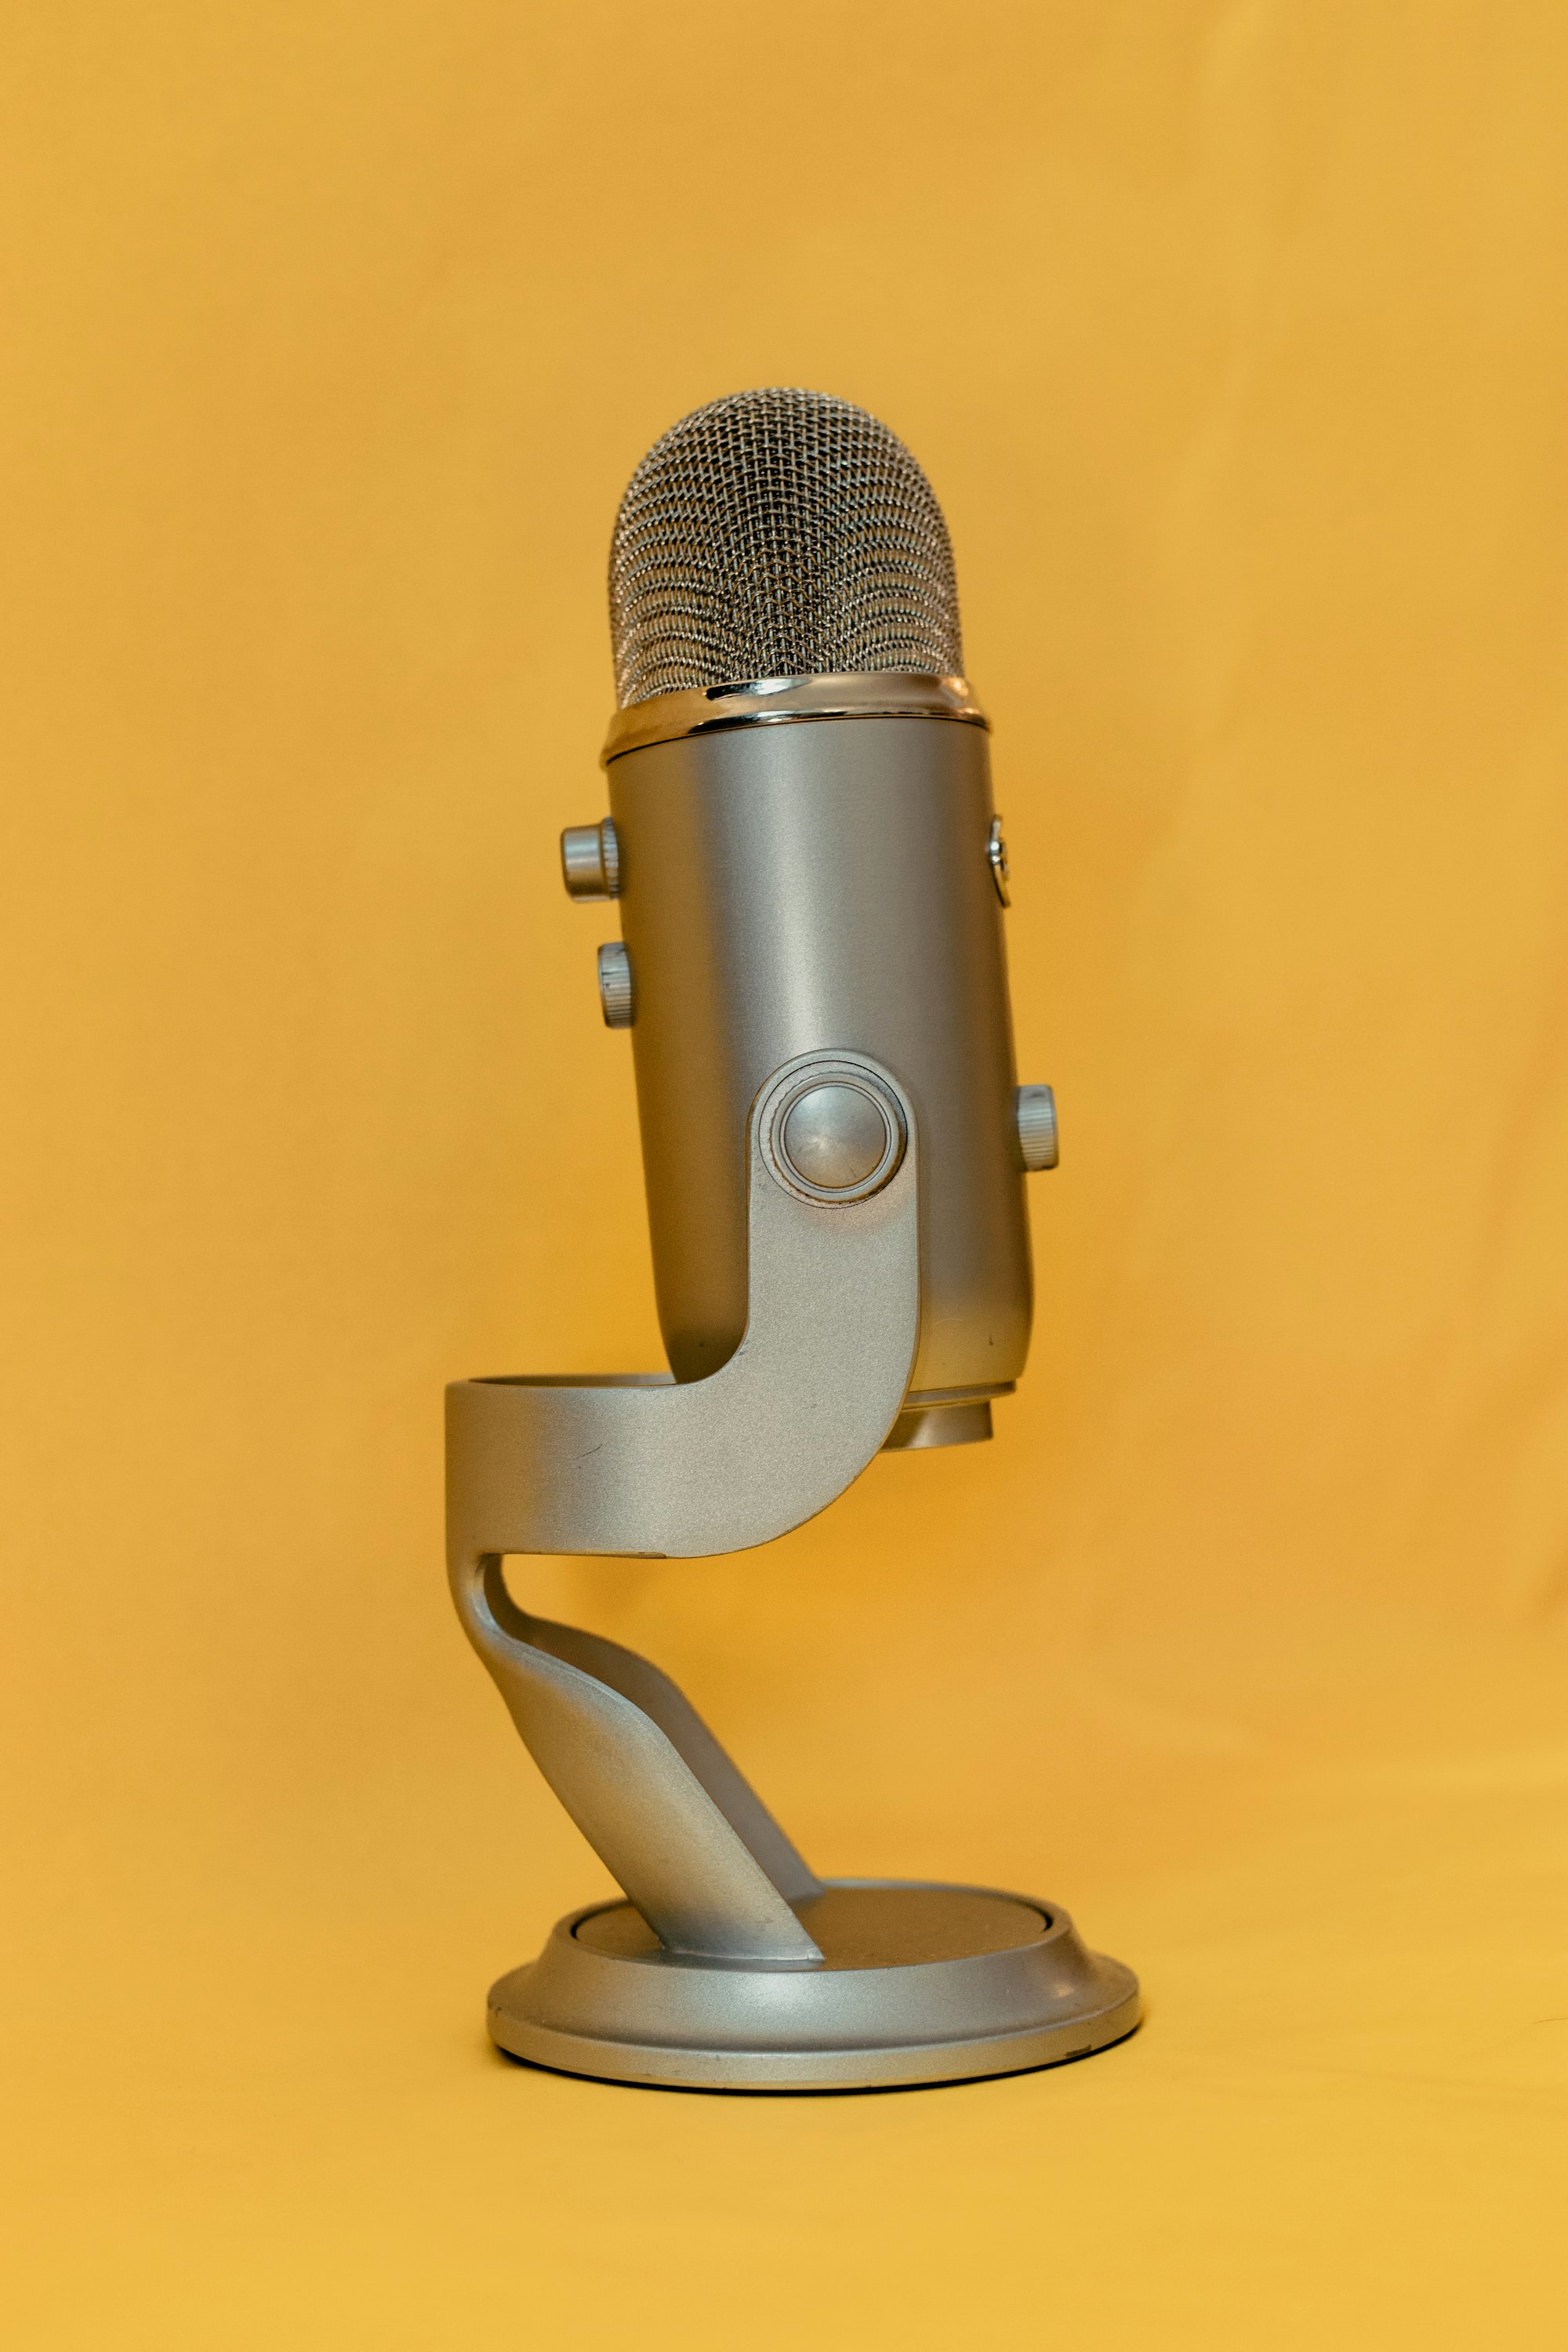 A microphone on its stand with a yellow background